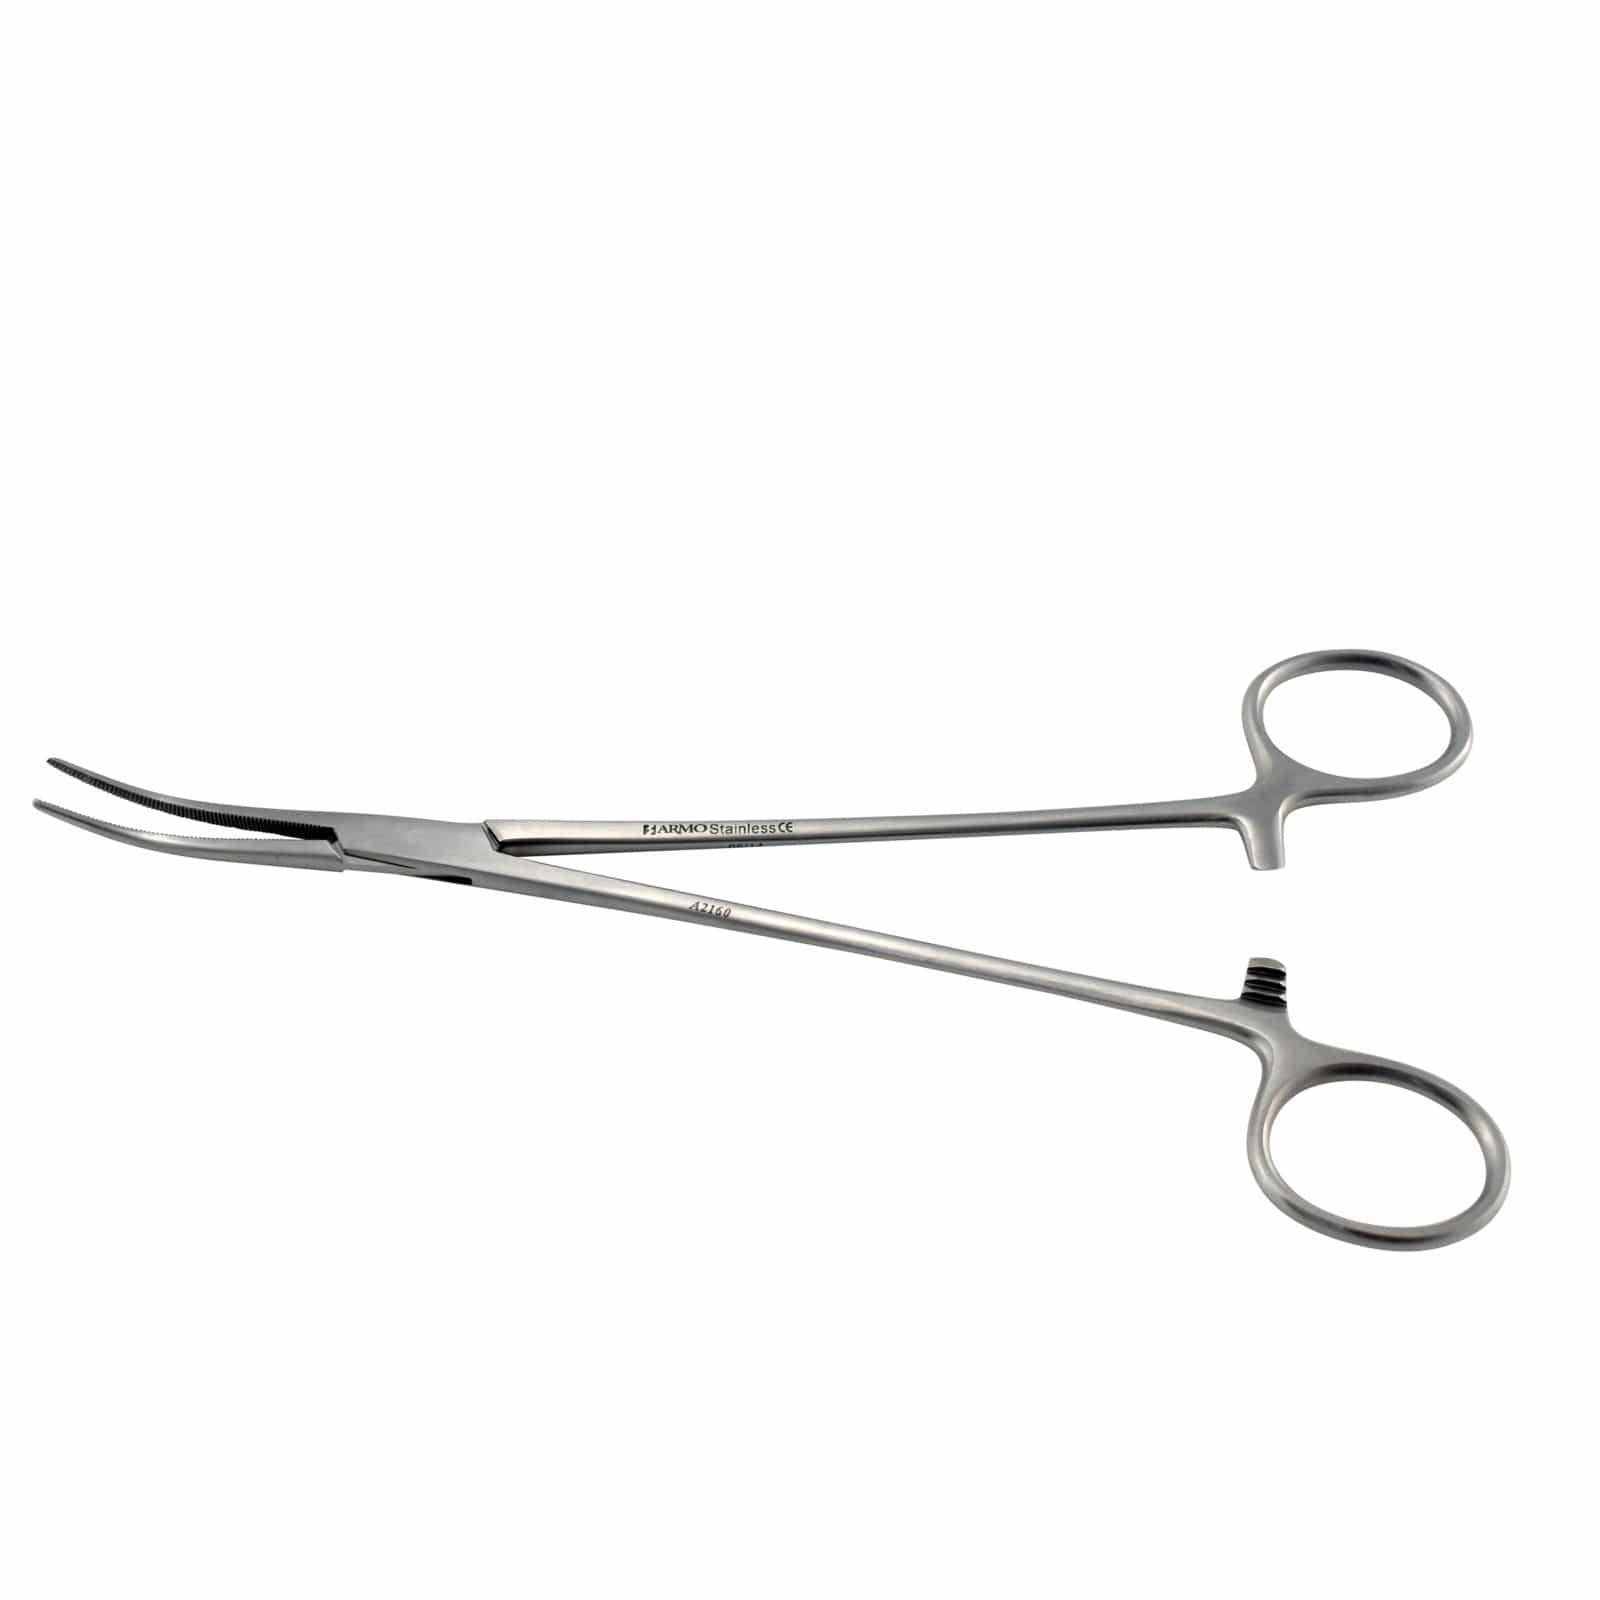 Armo Surgical Instruments 20cm / Curved Armo Roberts Artery Forceps